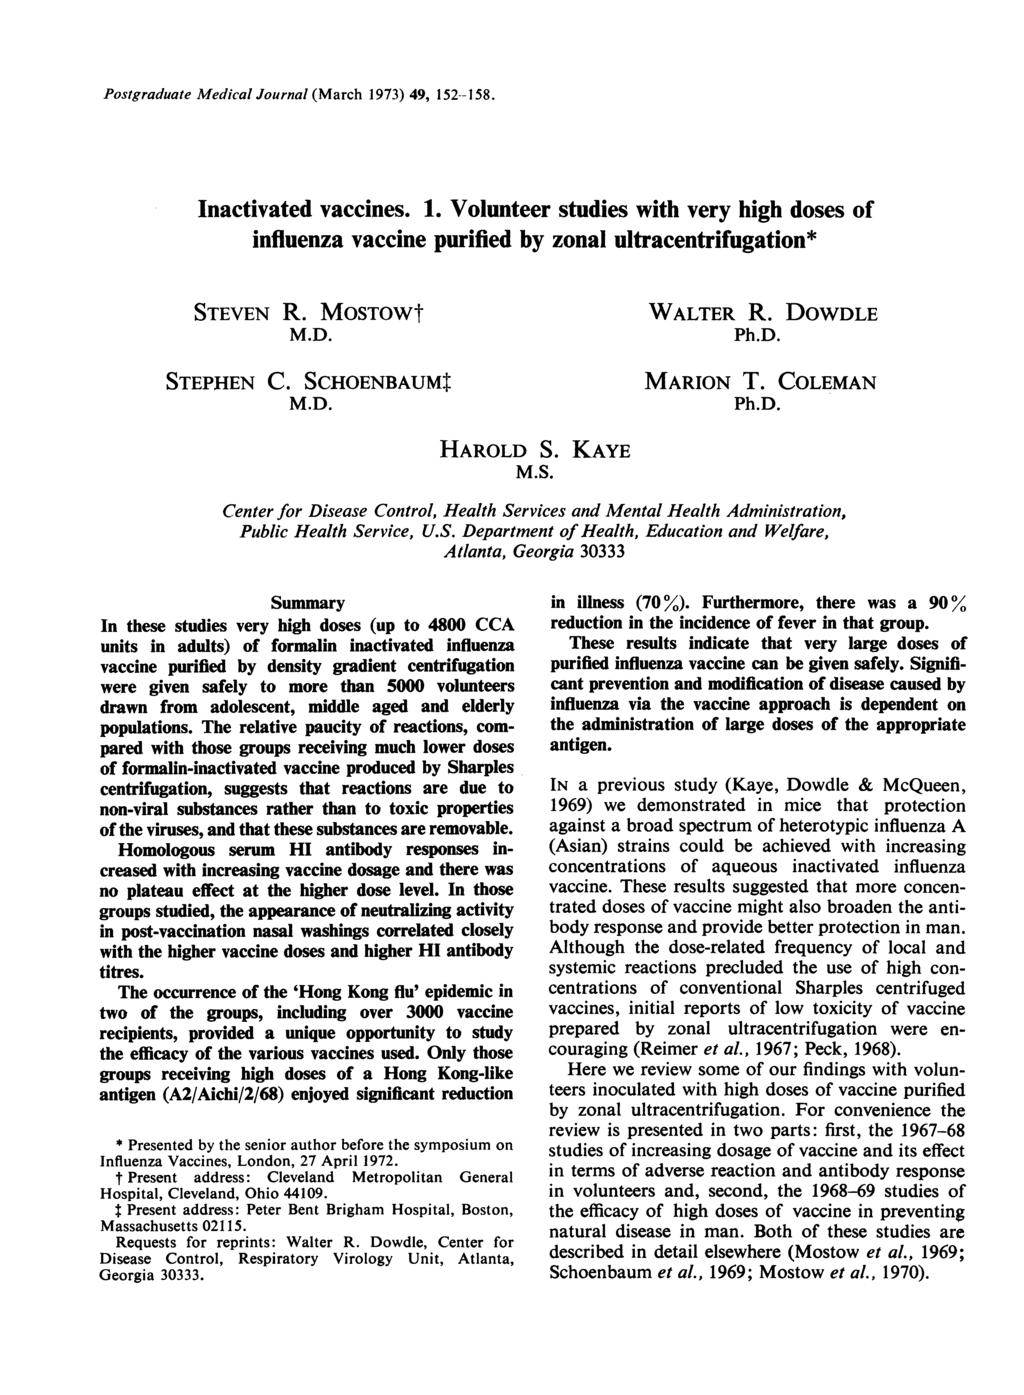 Postgraduate Medical Journal (March 1973) 49, 152-158. Inactivated vaccines. 1. Volunteer studies with very high doses of influenza vaccine purified by zonal ultracentrifugation STEVEN R. STEPHEN C.